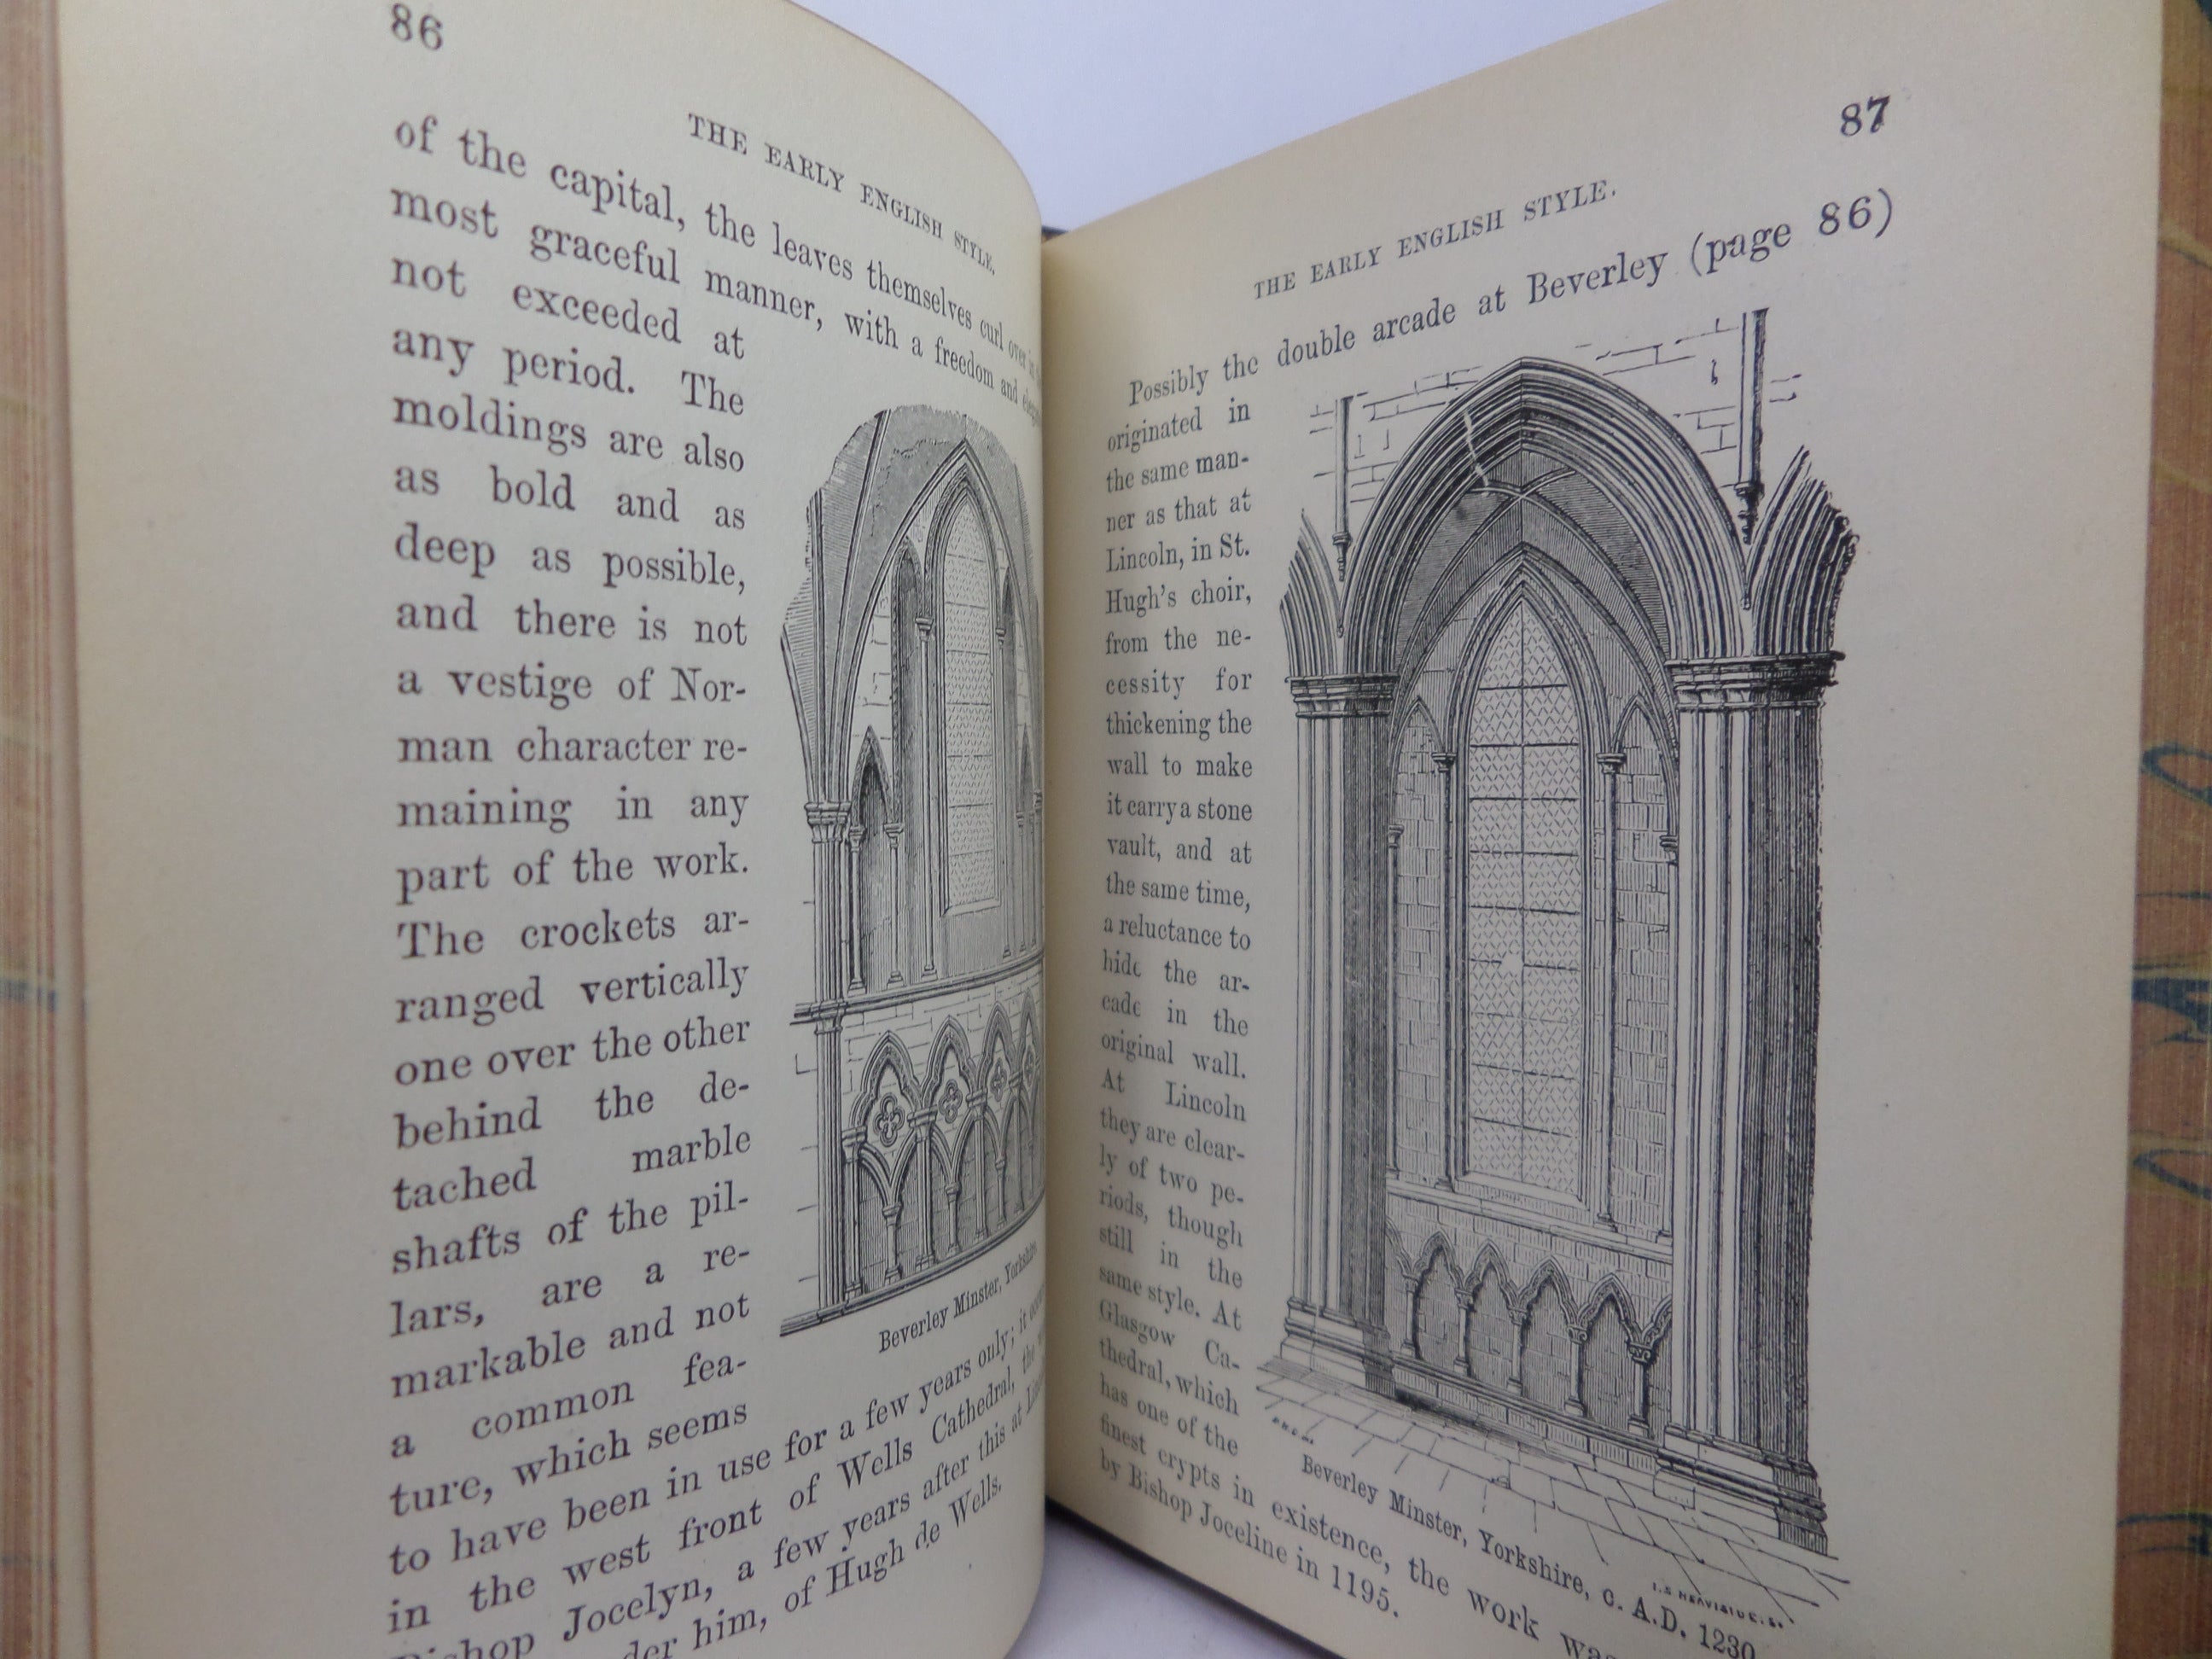 ABC OF GOTHIC ARCHITECTURE BY JOHN HENRY PARKER 1926 FINE LEATHER BINDING